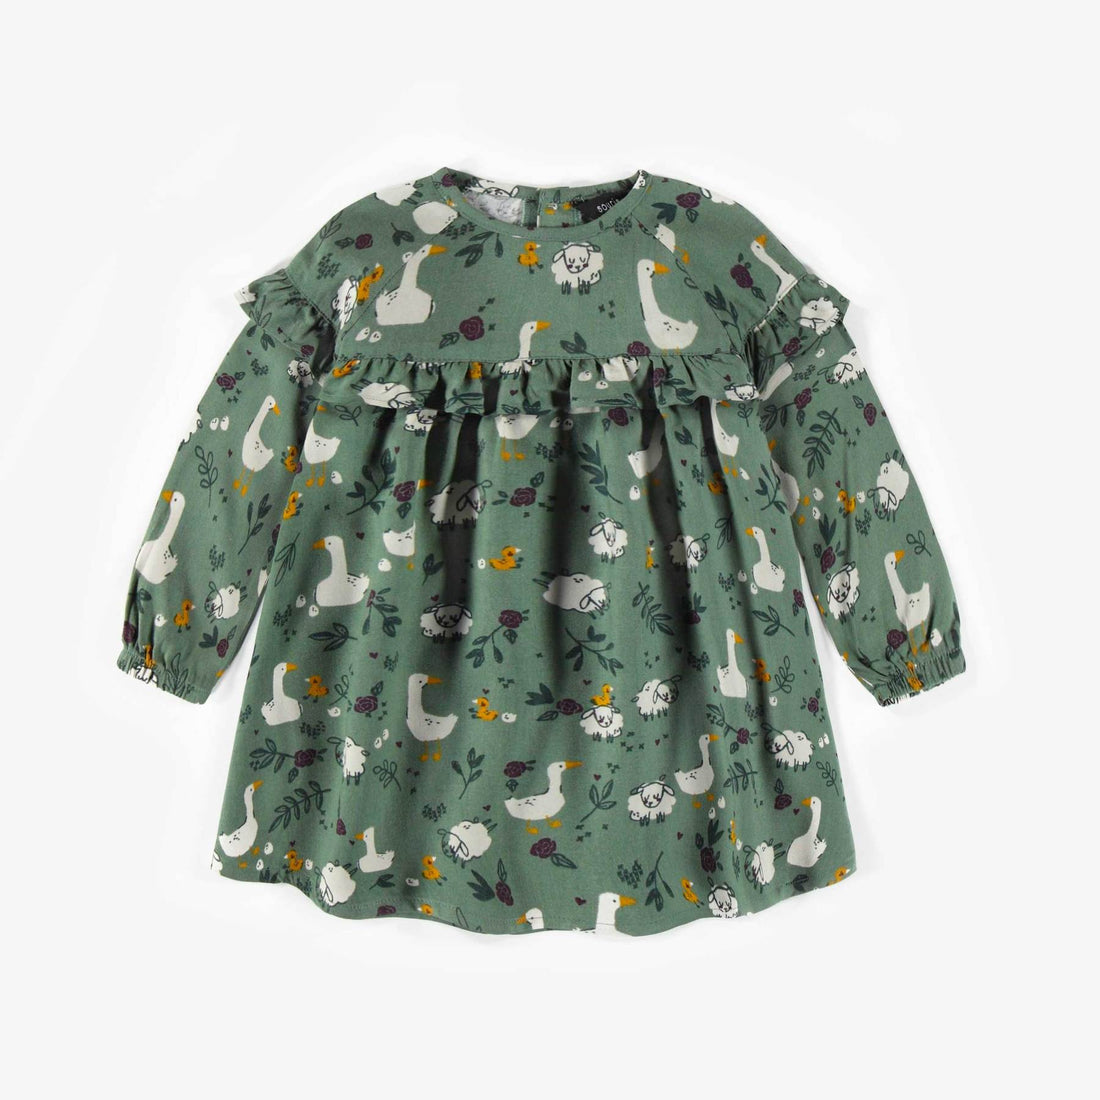 GREEN DRESS WITH FRILLS, BABY